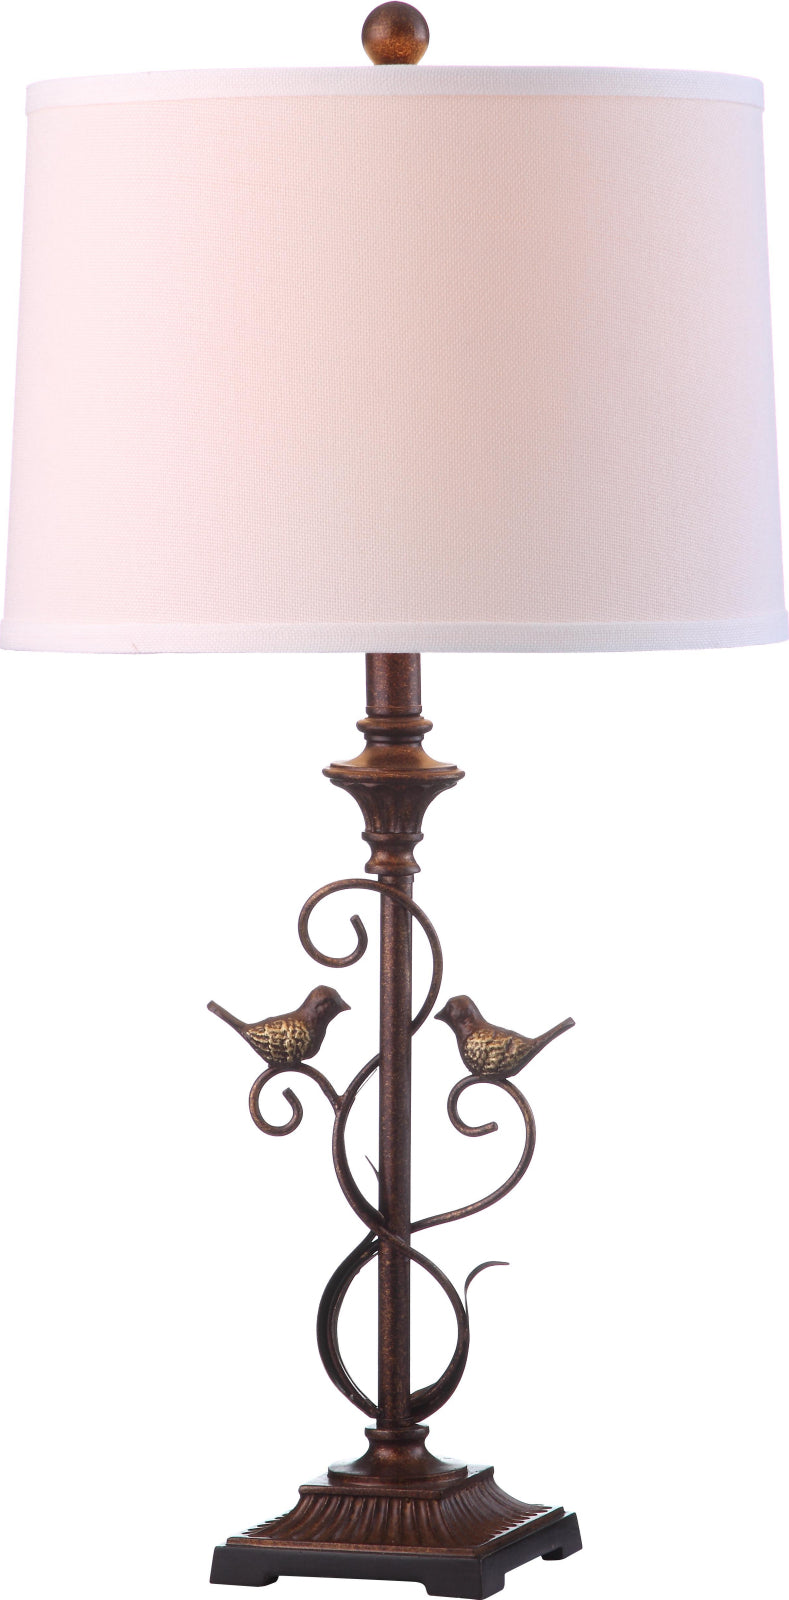 Safavieh Birdsong 28-Inch H Table Lamp Oil-Rubbed Bronze Mirror main image